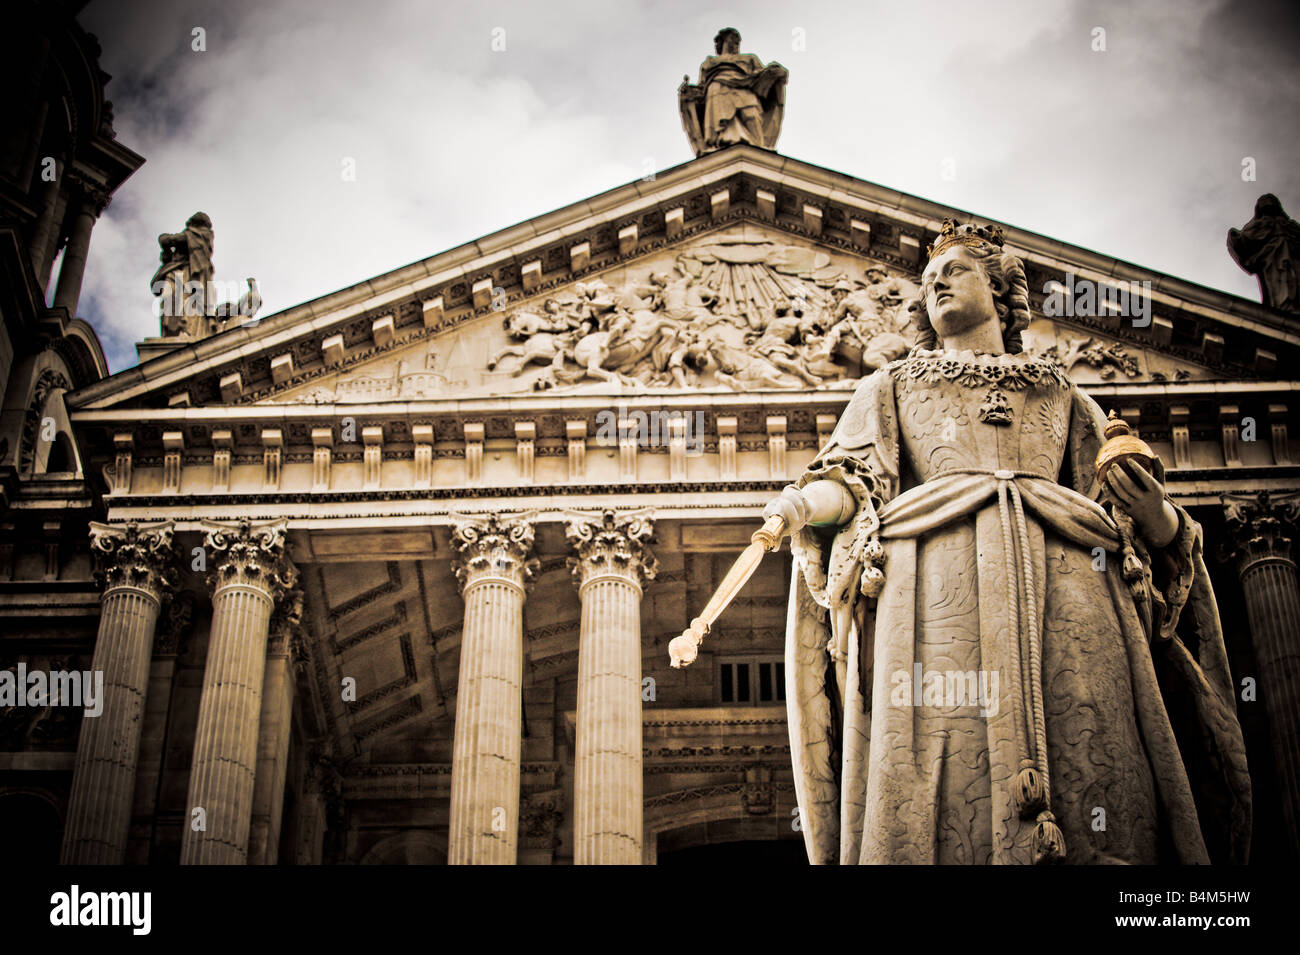 Queen Anne statue outside the west façade of St Paul's Cathedral London UK Stock Photo